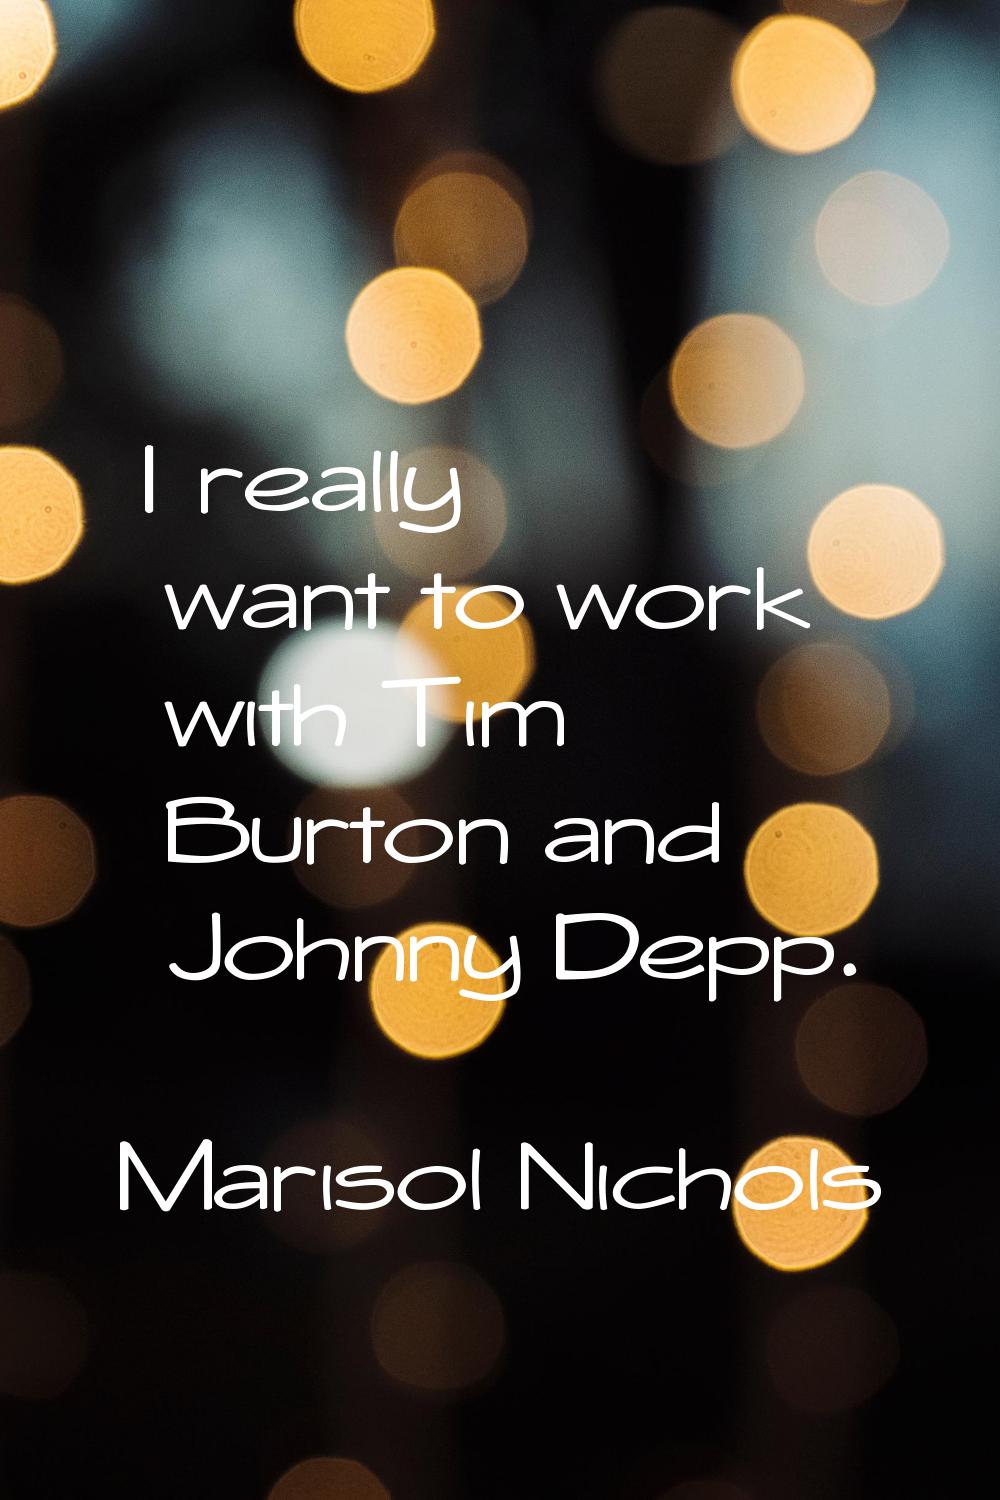 I really want to work with Tim Burton and Johnny Depp.